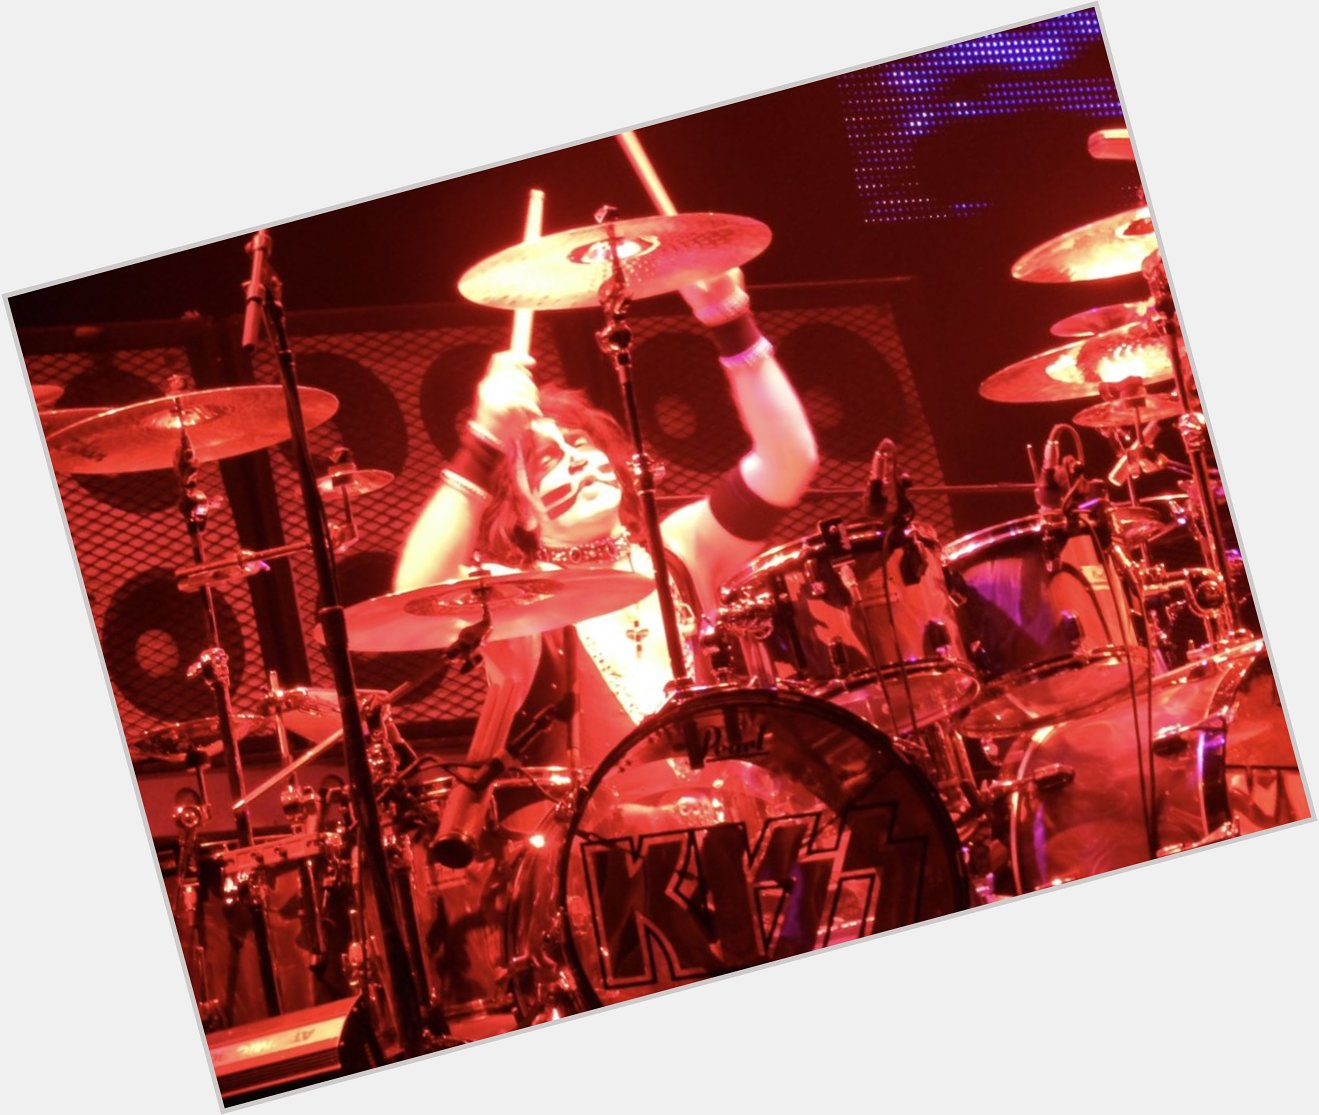   Happy Birthday Eric Singer!
Here s a shot I took back in 2011.  